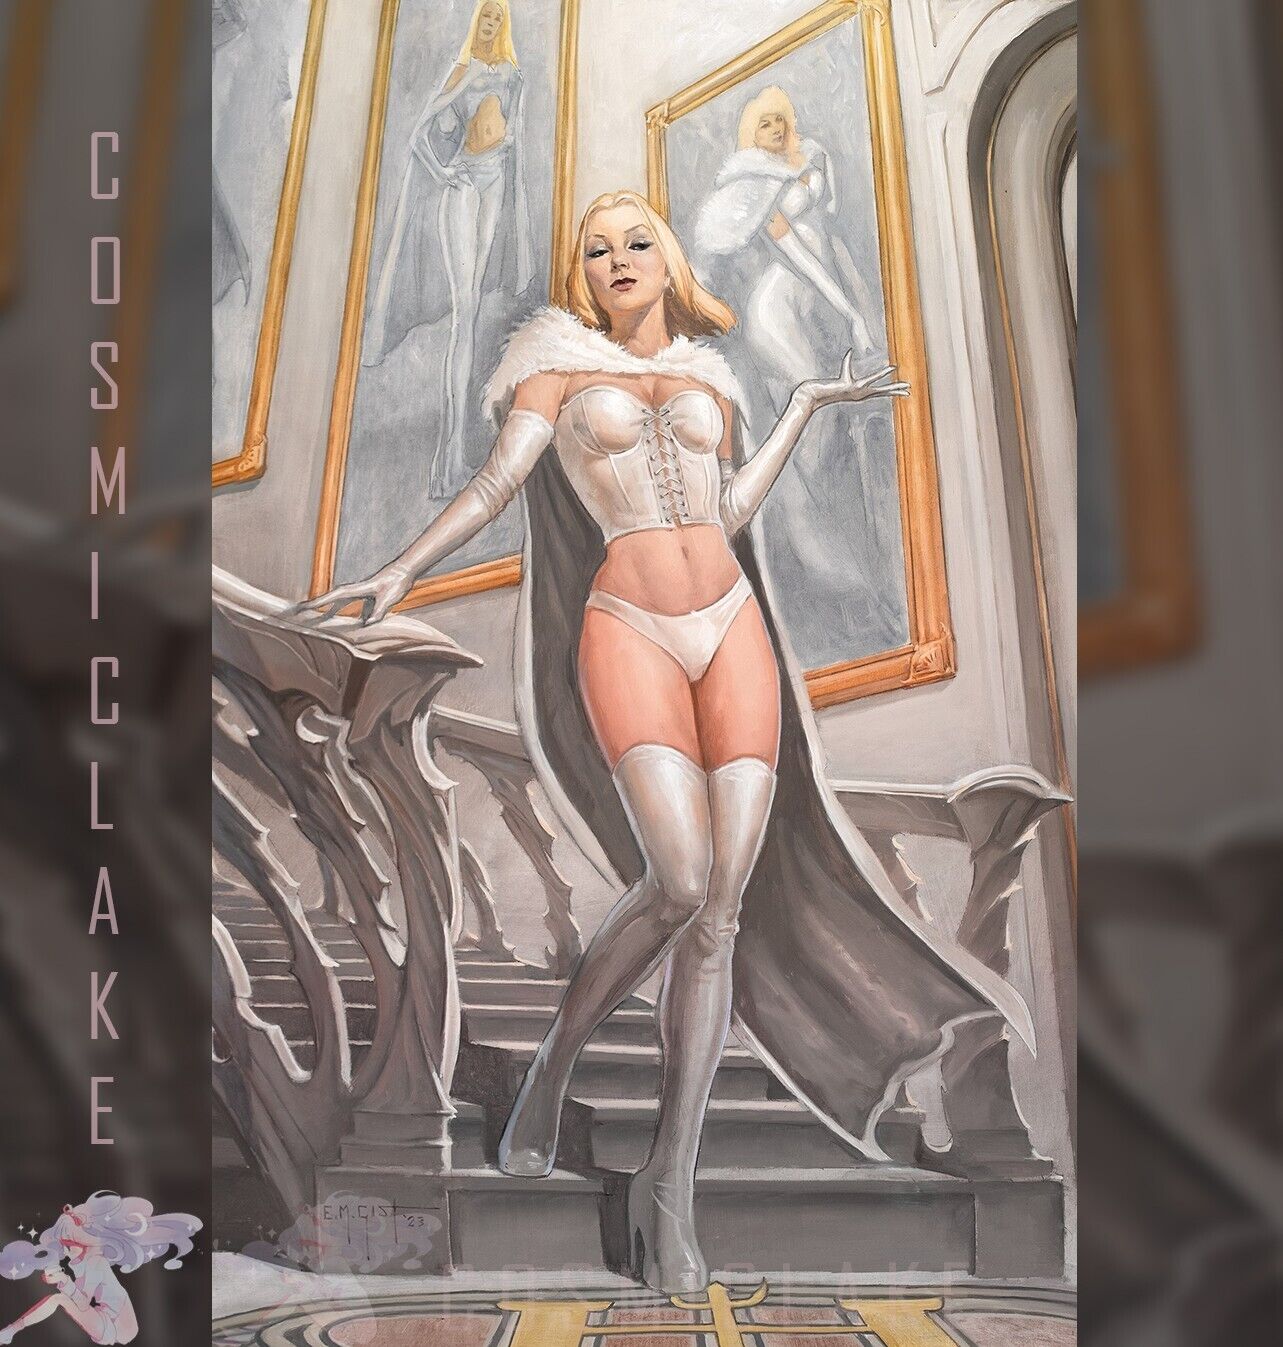 FALL OF HOUSE OF X #4 E.M GIST 1:50 VIRGIN RATIO EMMA FROST VAR PREORDER 4/17☪